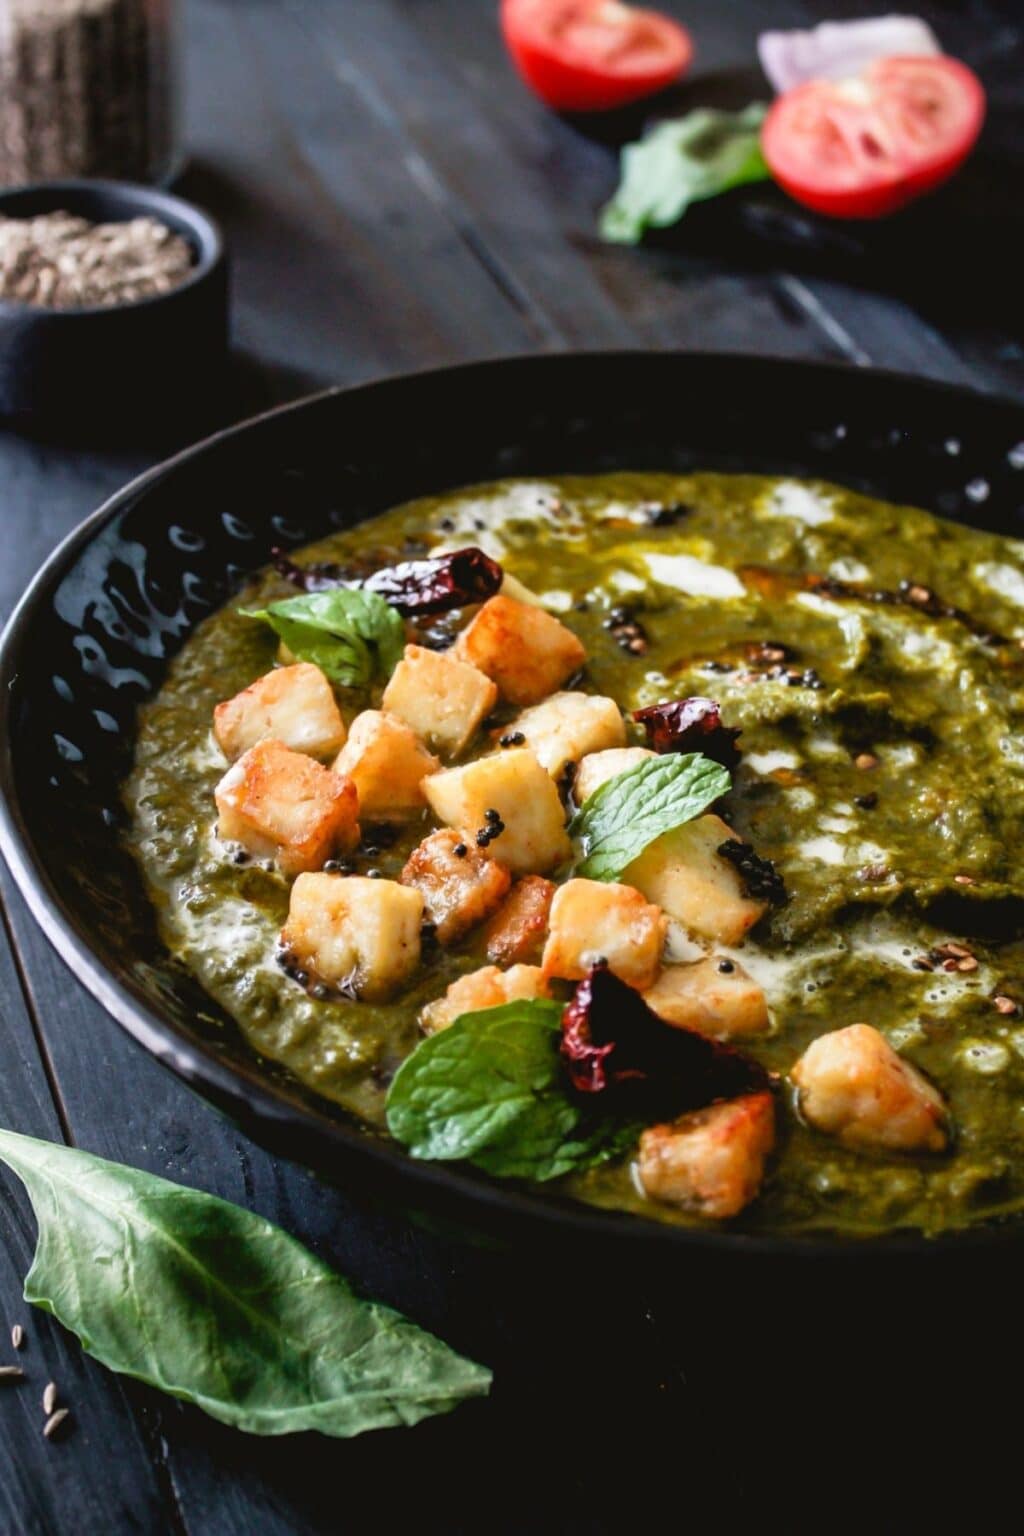 Is palak and spinach different?